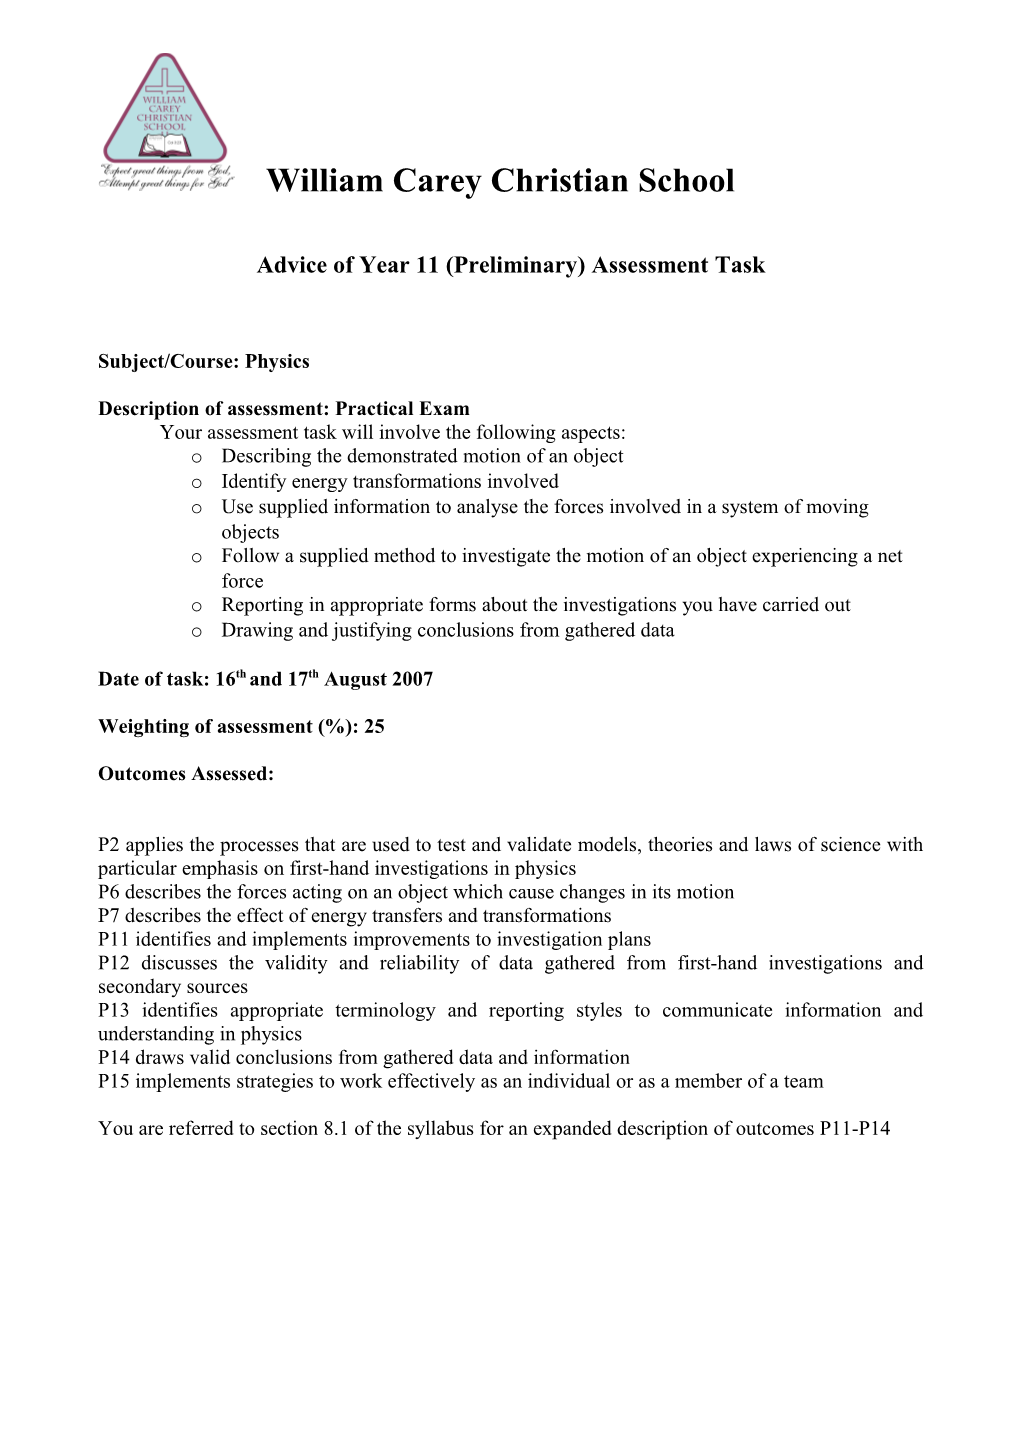 Advice of Year 11 (Preliminary) Assessment Task